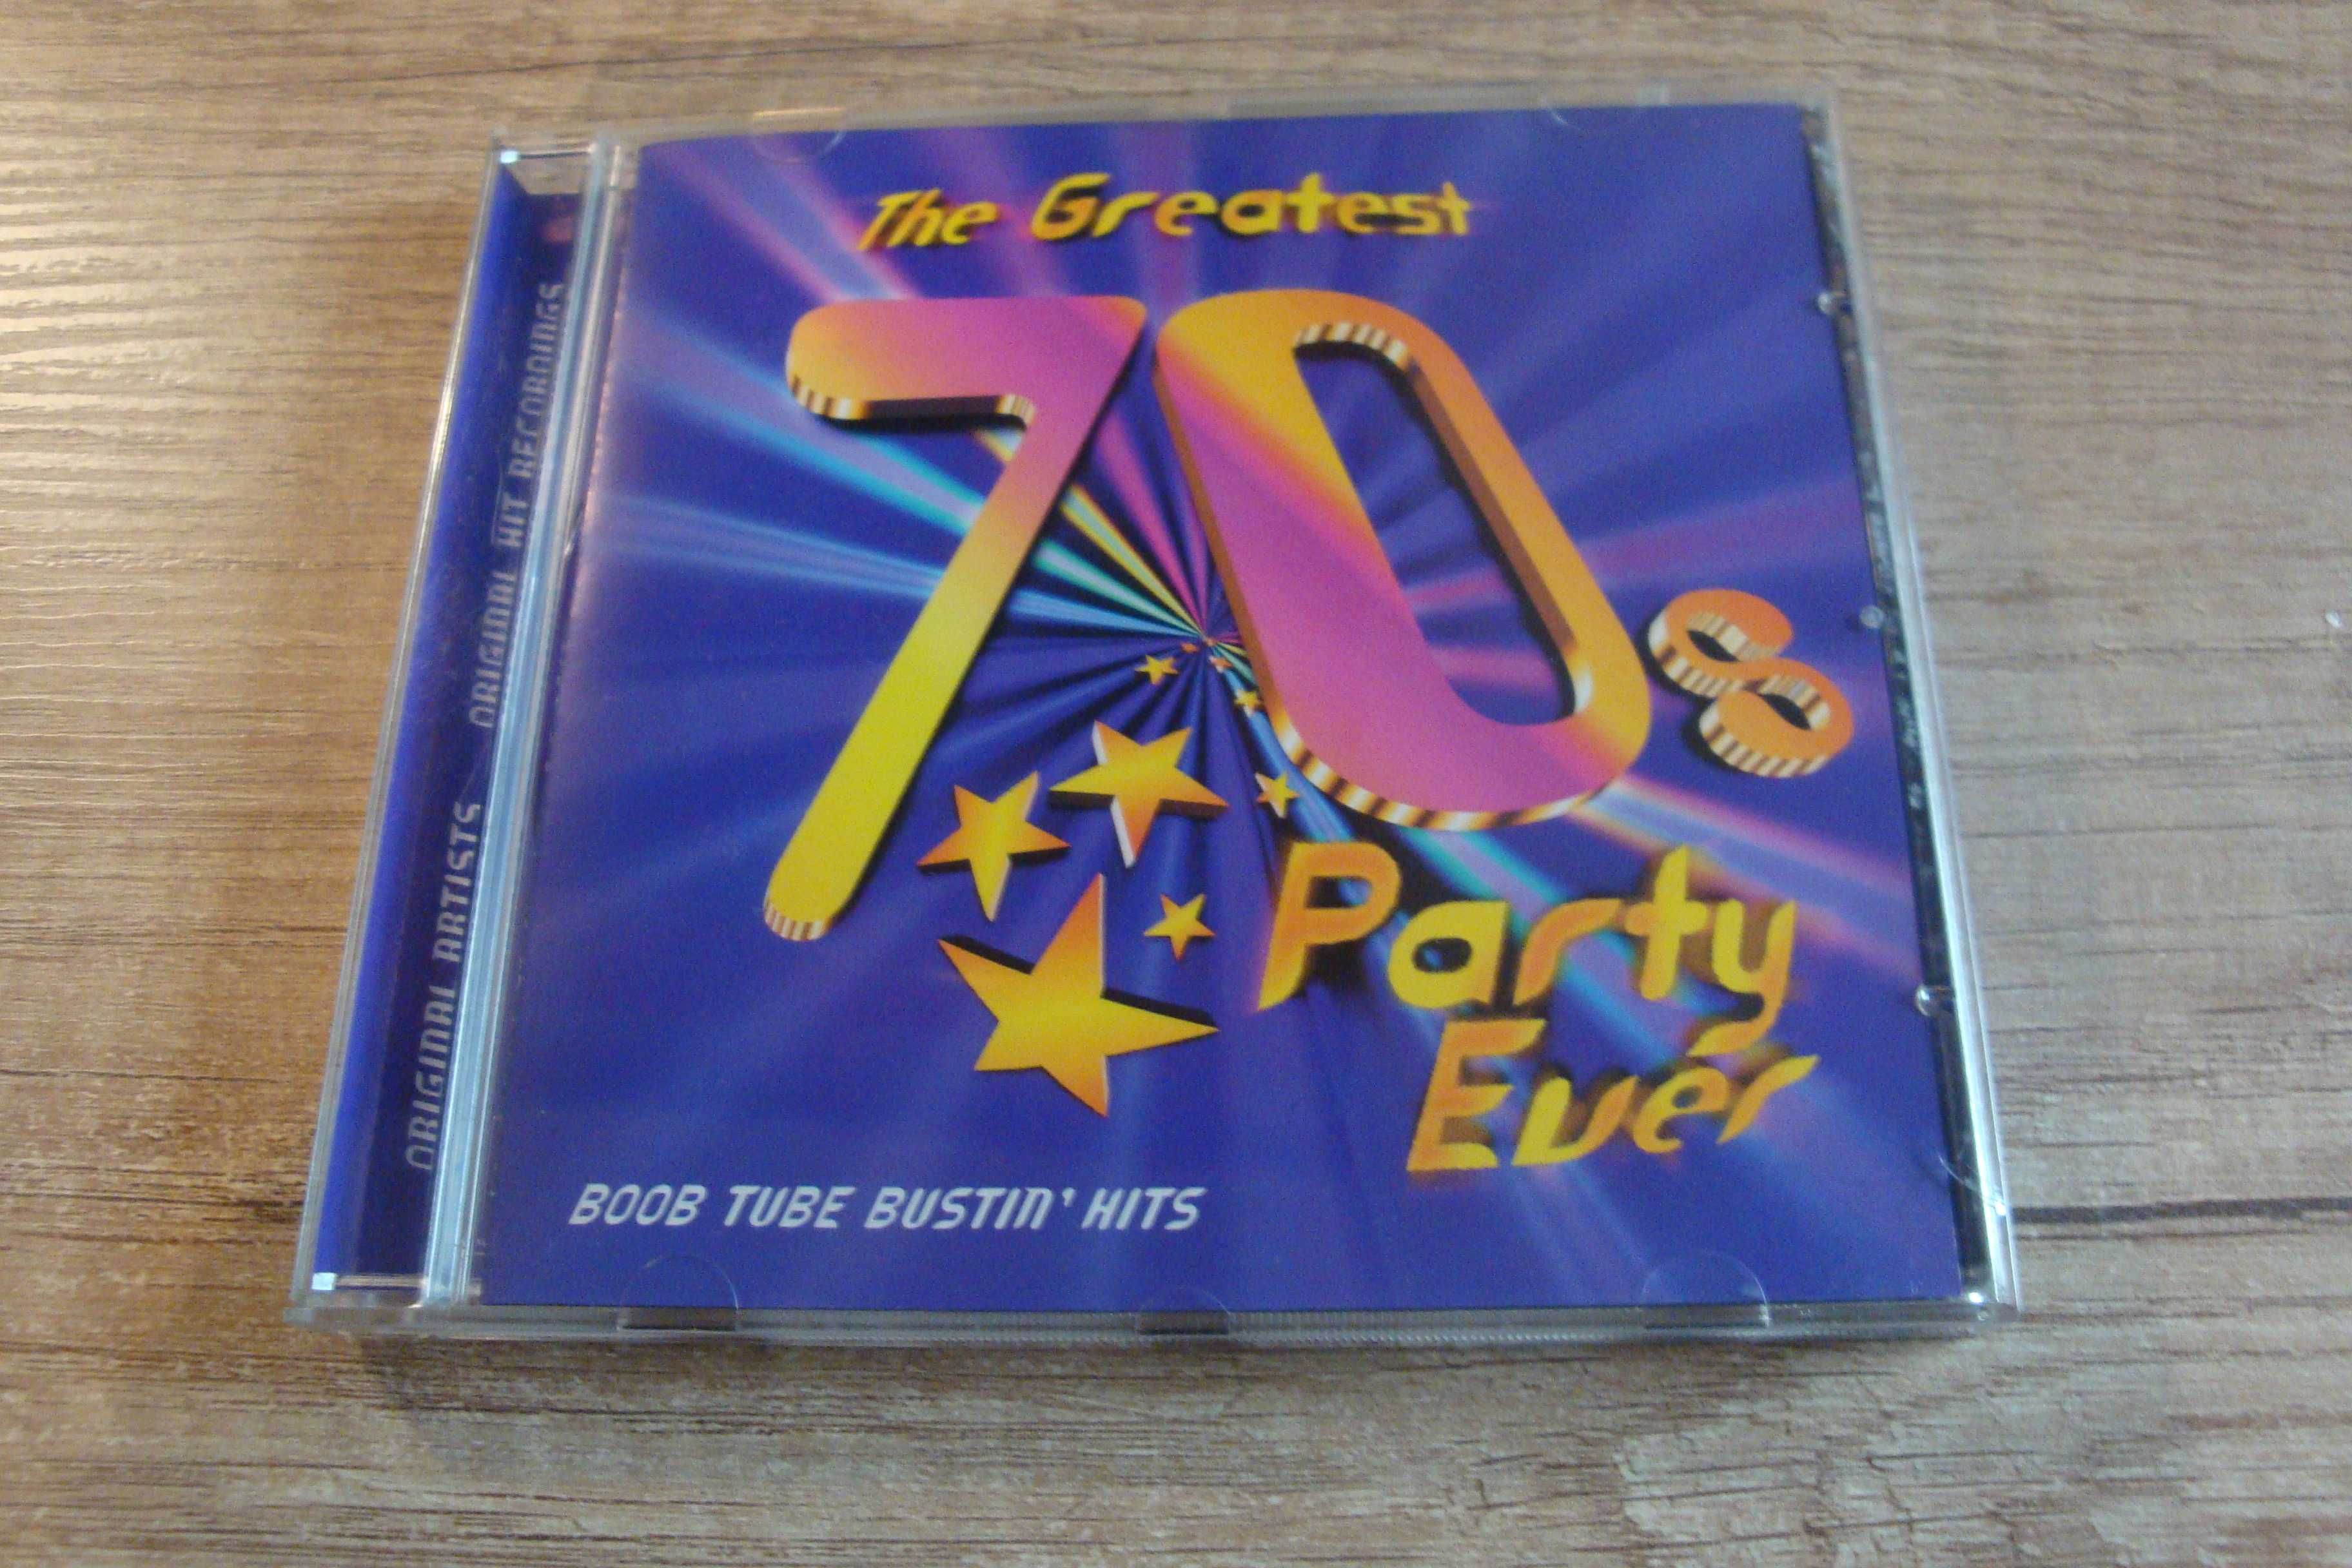 The Greatest 70's Party Ever (Glitter Band Barry Blue Hot Butter)